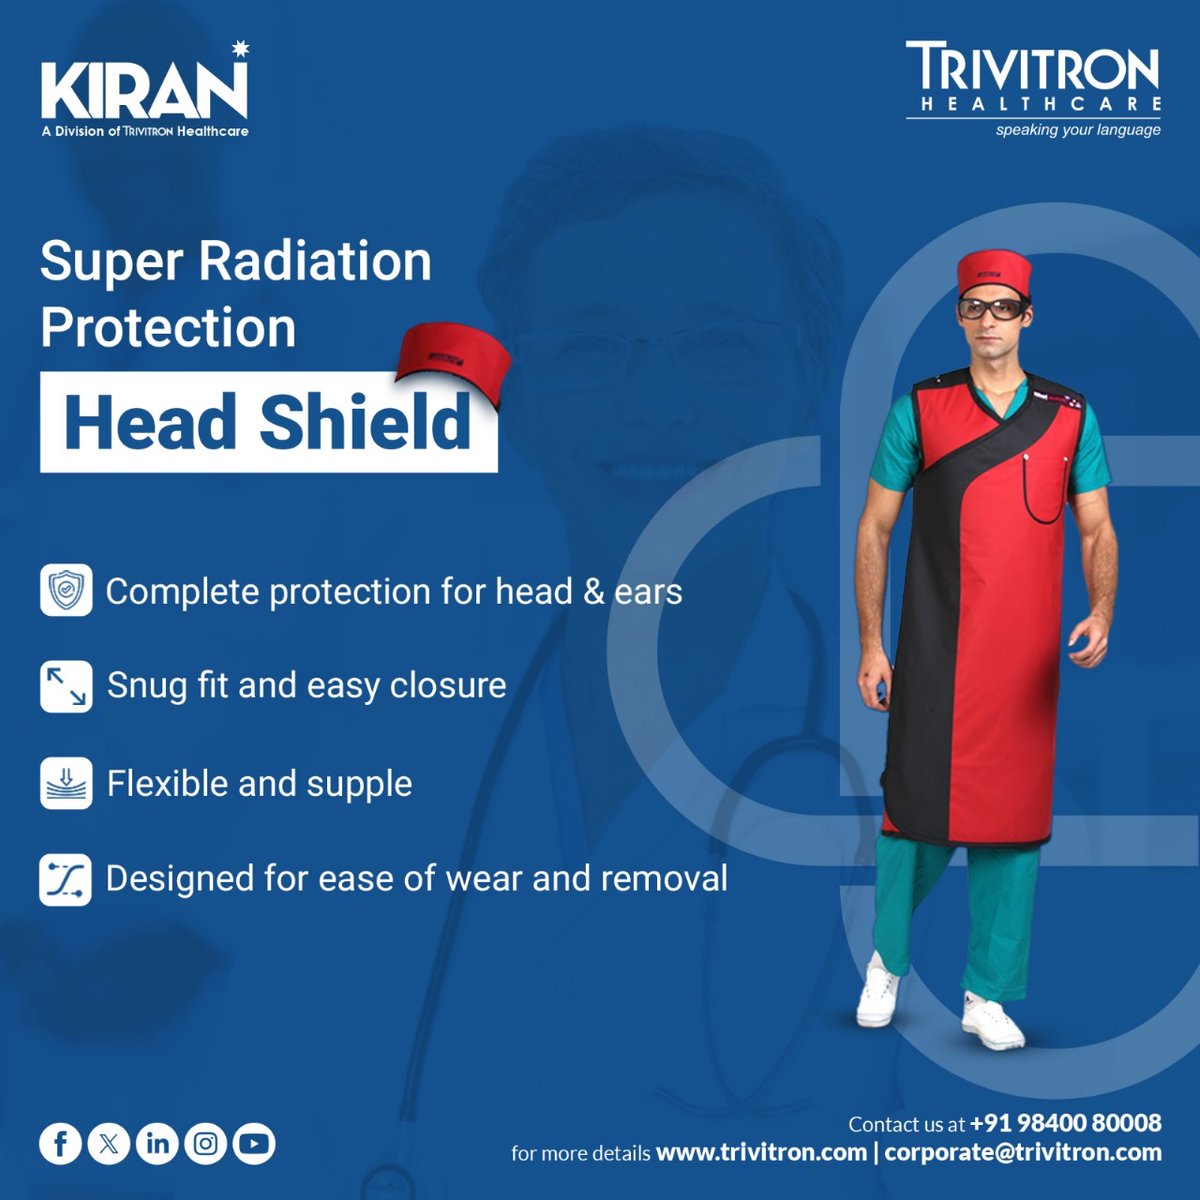 Trivitron Radiation Protection - Head Shield provides complete protection to the Head and Ears from Ionizing Radiation during extensive surgical procedures. The radiation protection head shield provides a snug fit and is designed for ease of wearing and removal. To know more,…